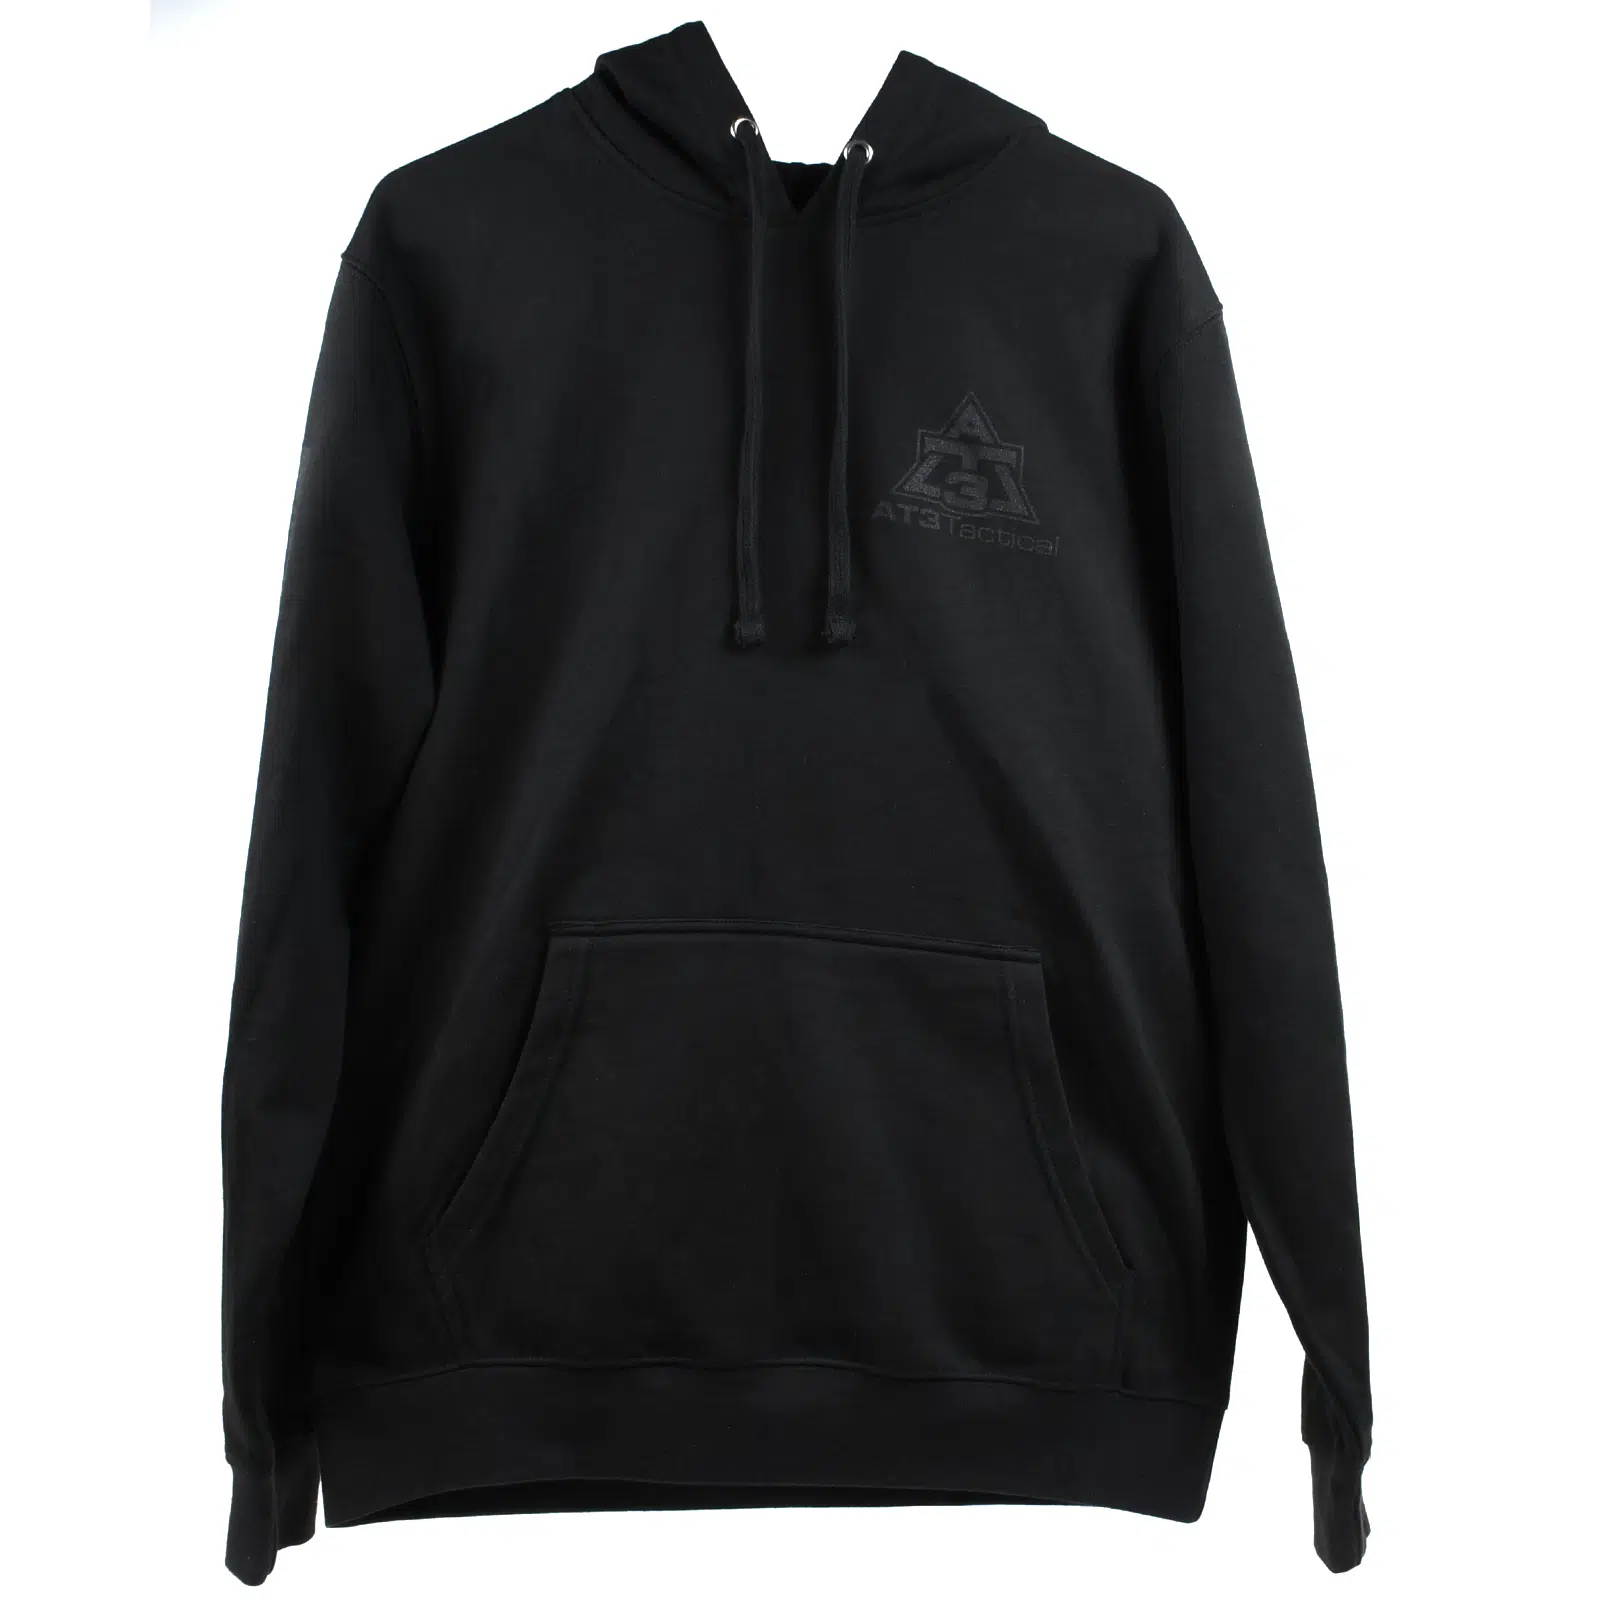 AT3 Tactical Blackout Hoodie